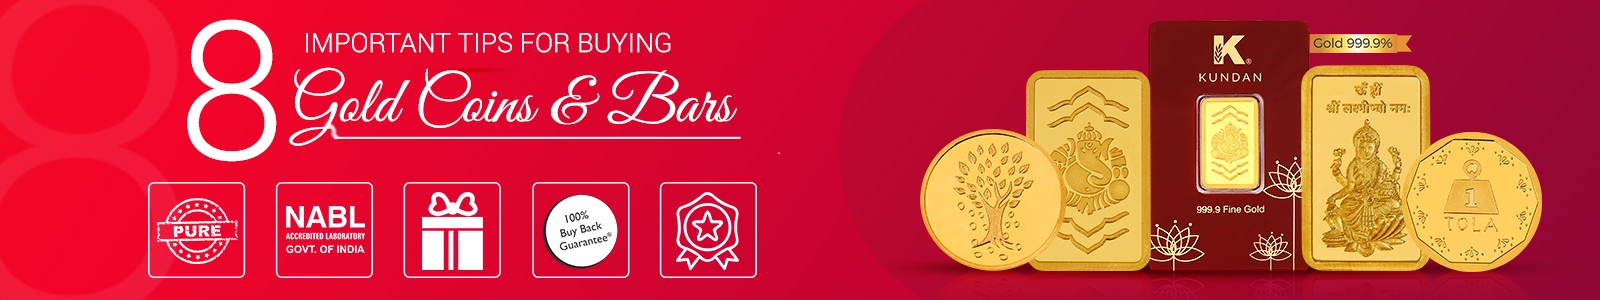 8 Important Tips For Buying Gold Coins & Bars